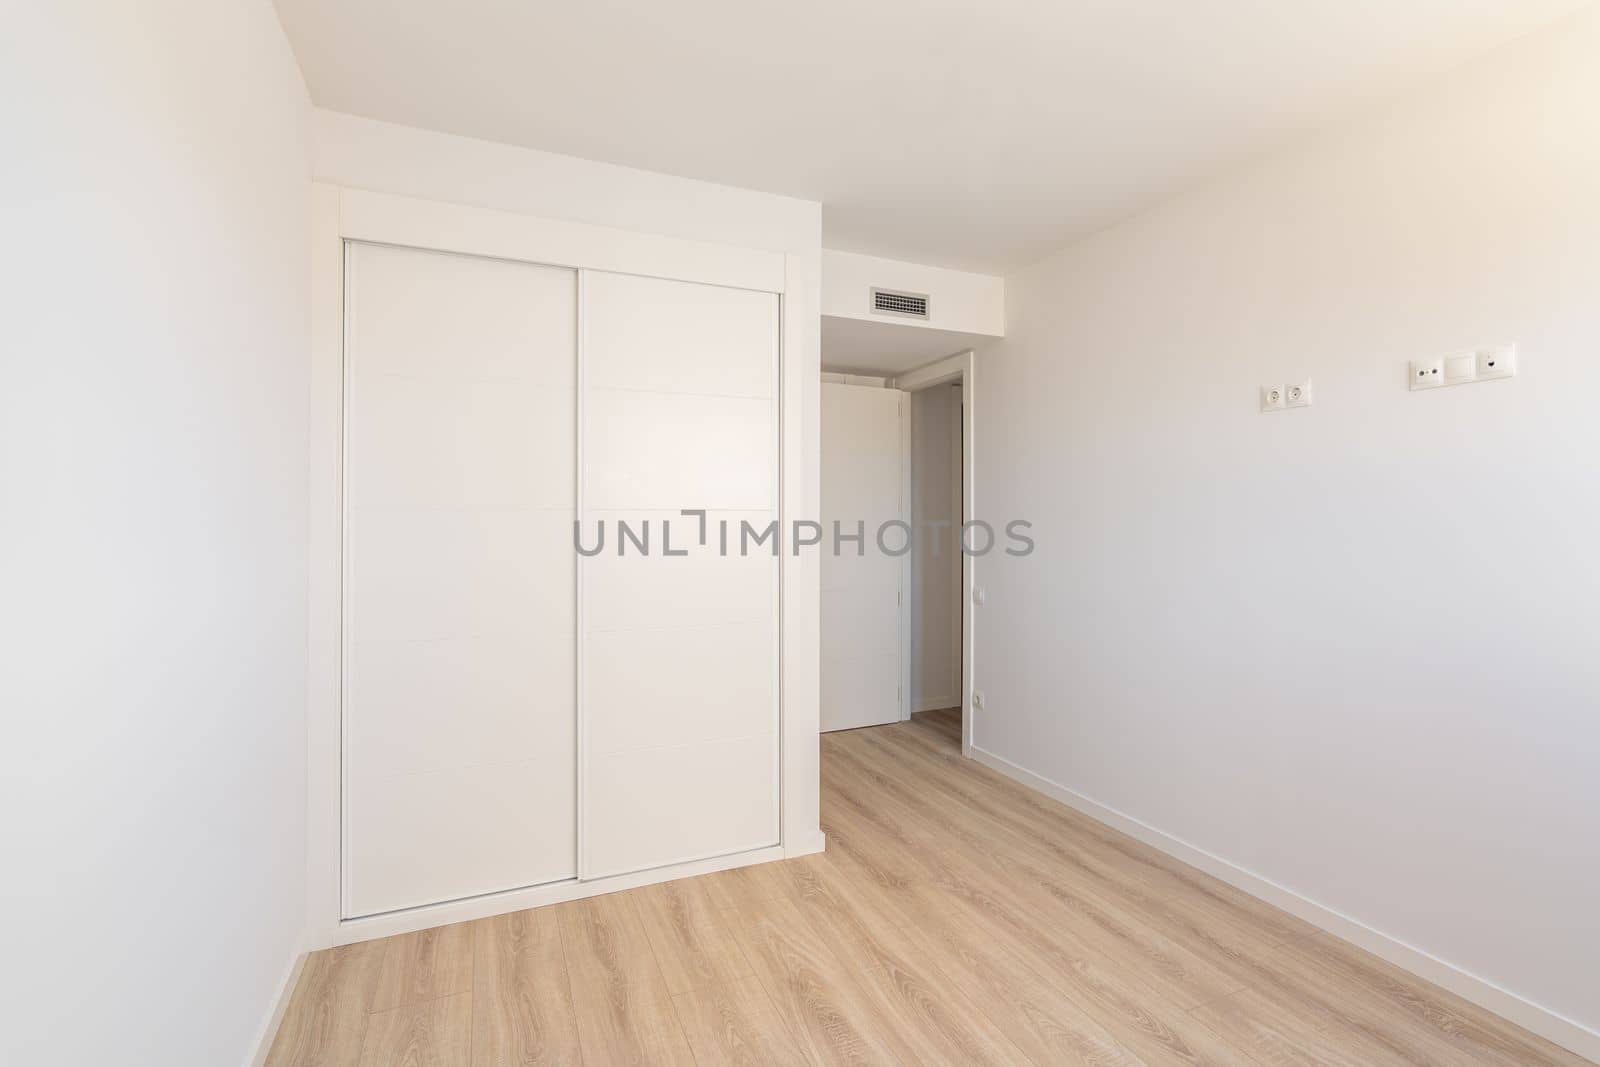 White empty sunny room with built-in wardrobe ventilation and two doors to the bathroom and exit. Concept of a new building or real estate for rent.